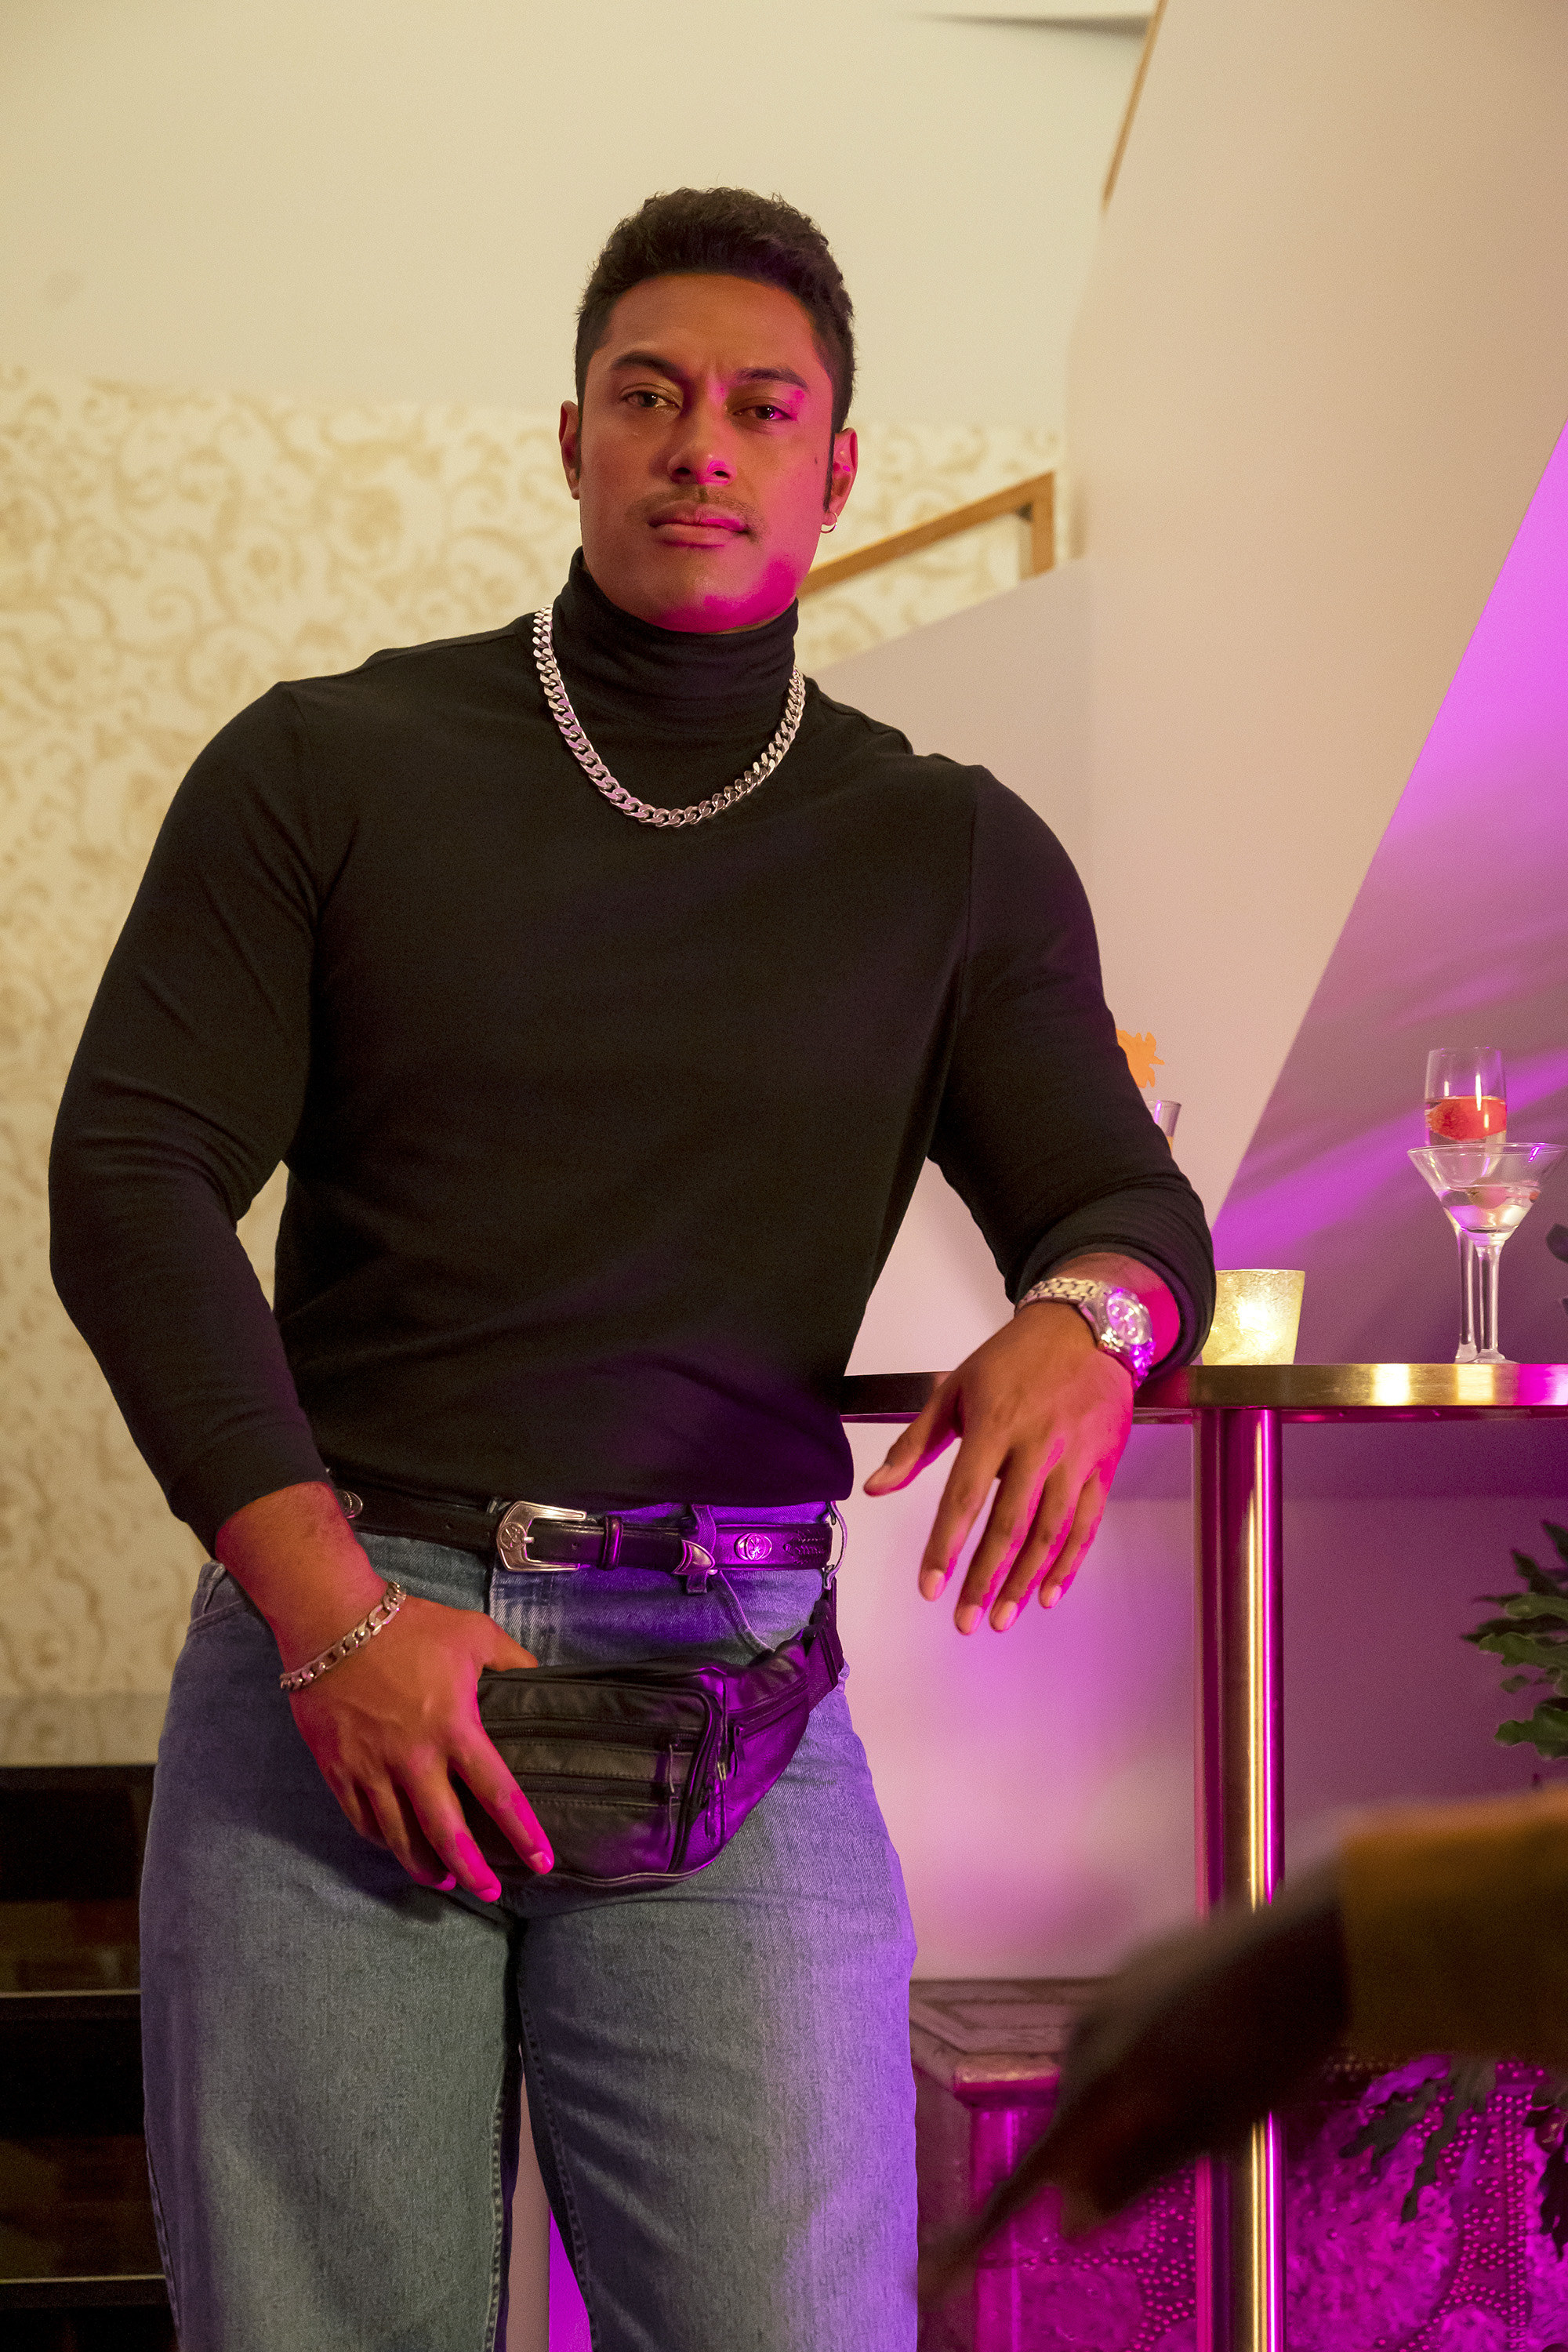 Latukefu poses with his fanny pack